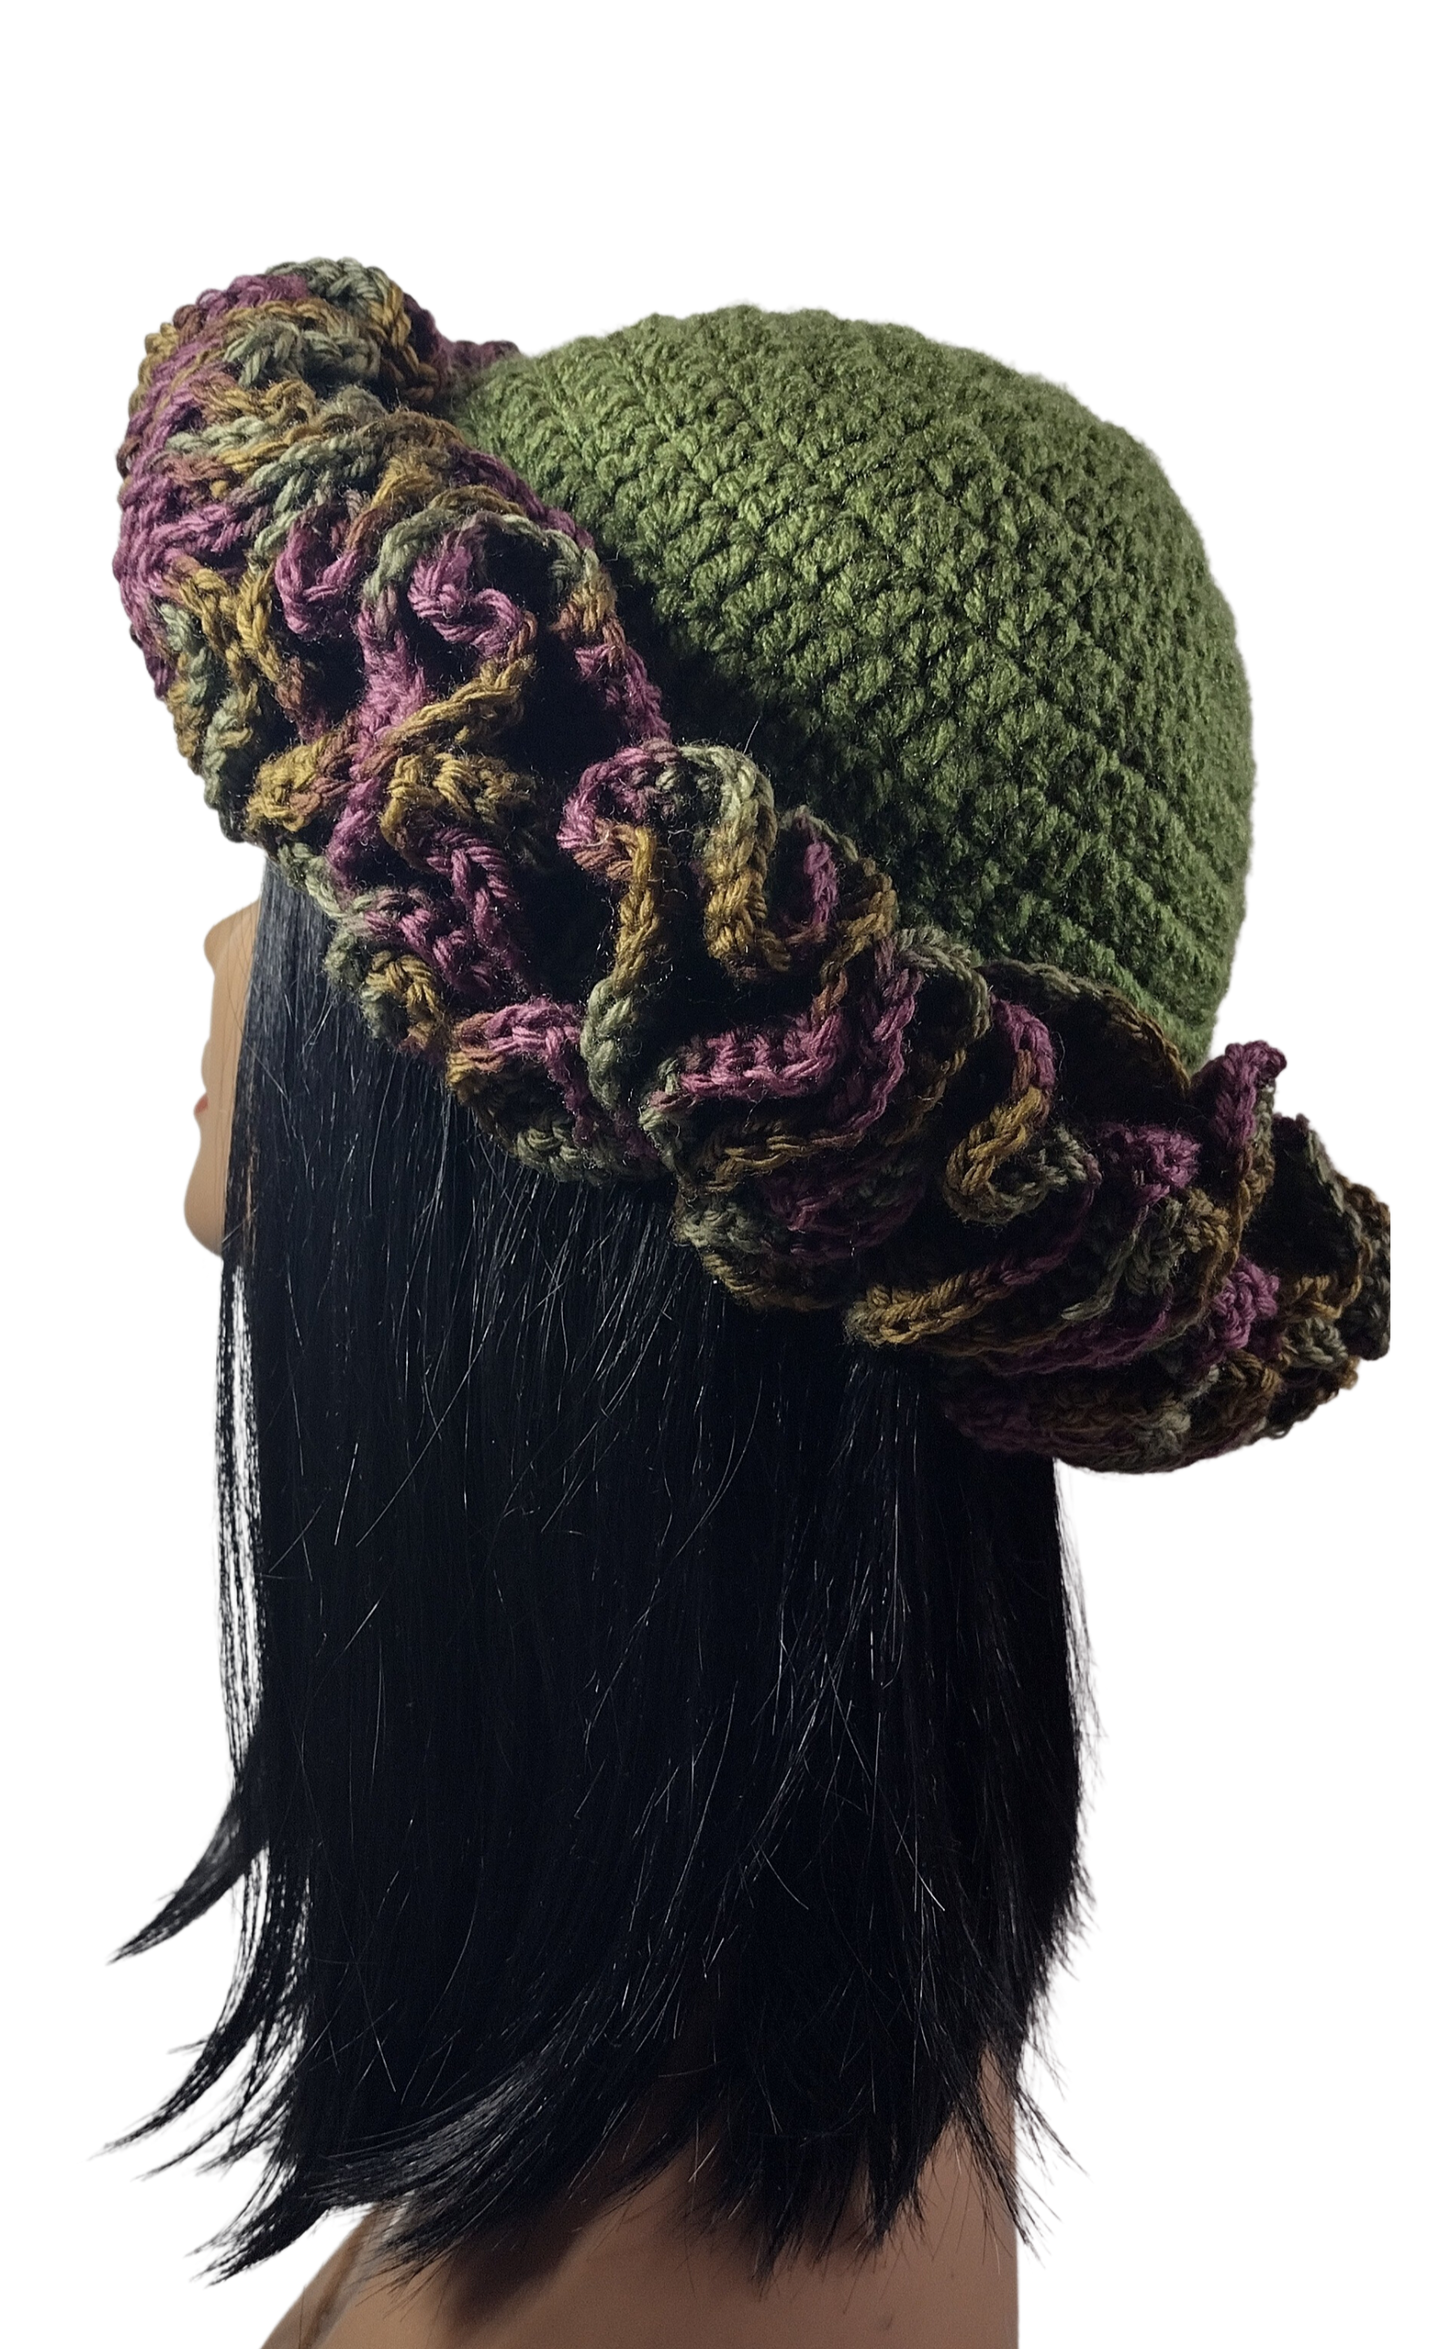 **LIMITED EDITION** Blk Lotus Co Diva Crown with Olive Green Beanie and Merino Wool Mauve and tones of green Ruffles: Luxury Meets Elegance